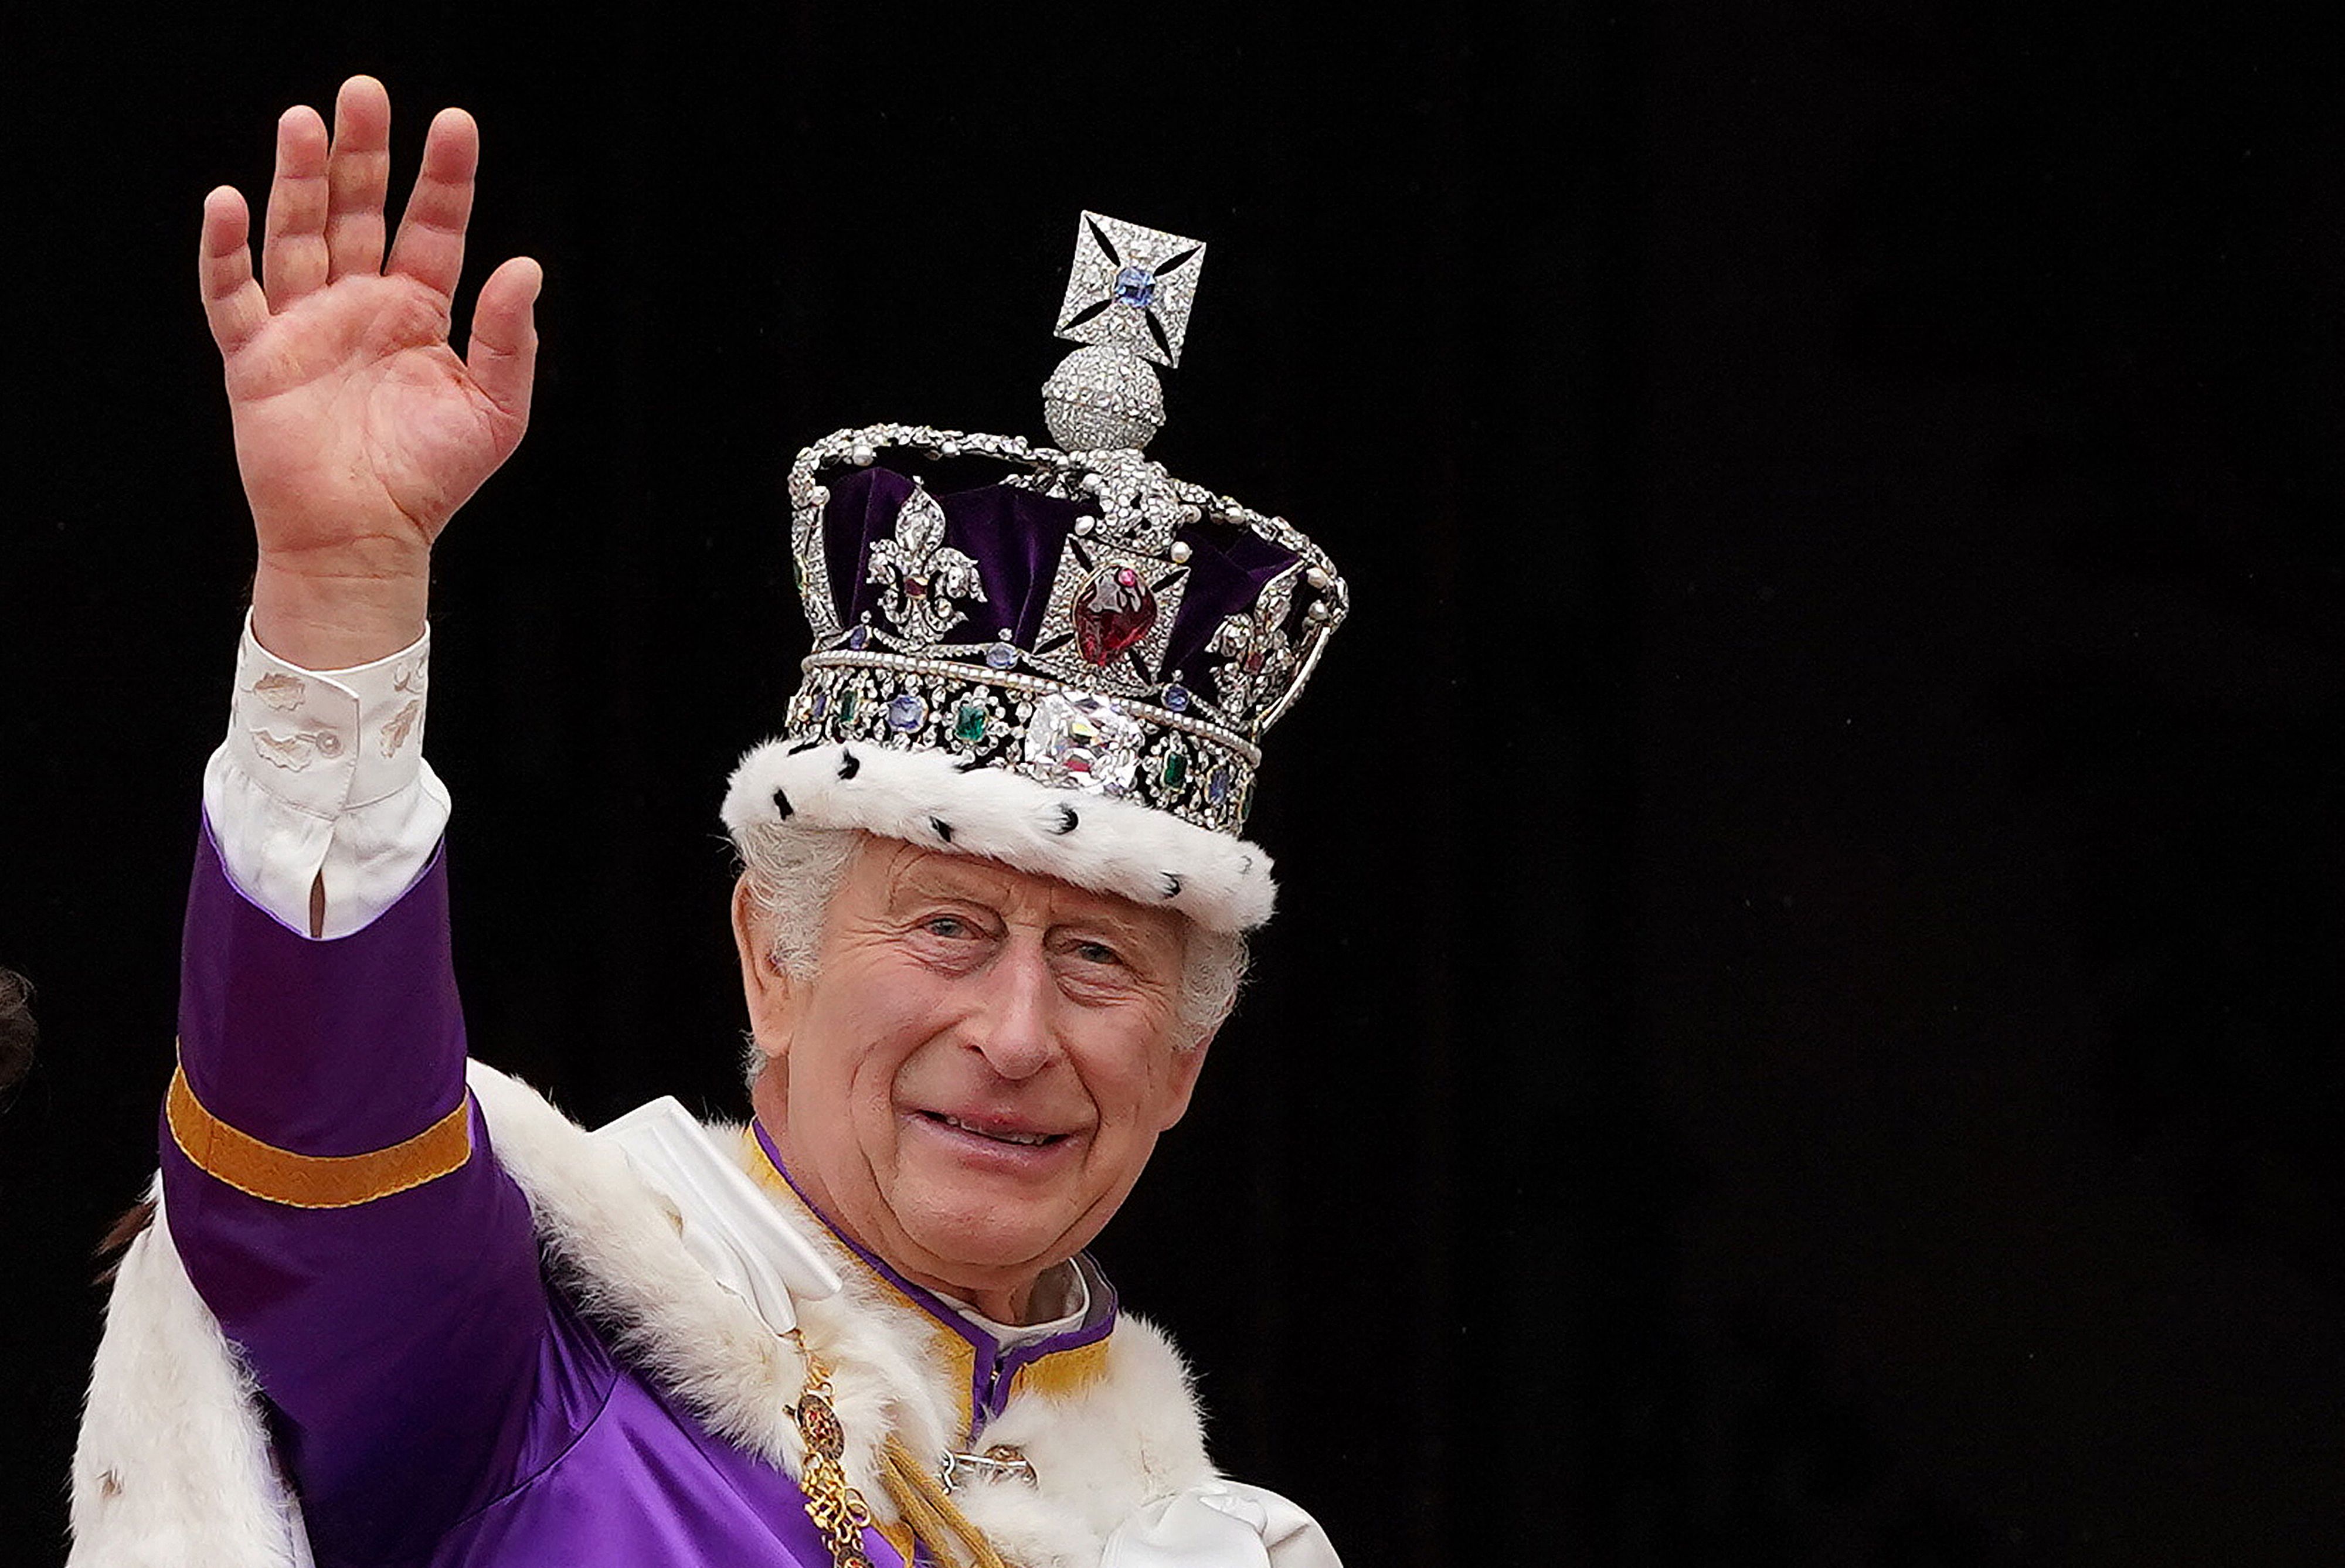 King Charles III wearing the Imperial state Crown as he waves from the Buckingham Palace balcony after viewing the Royal Air Force fly-past in central London on May 6, 2023, after his coronation | Source: Getty Images